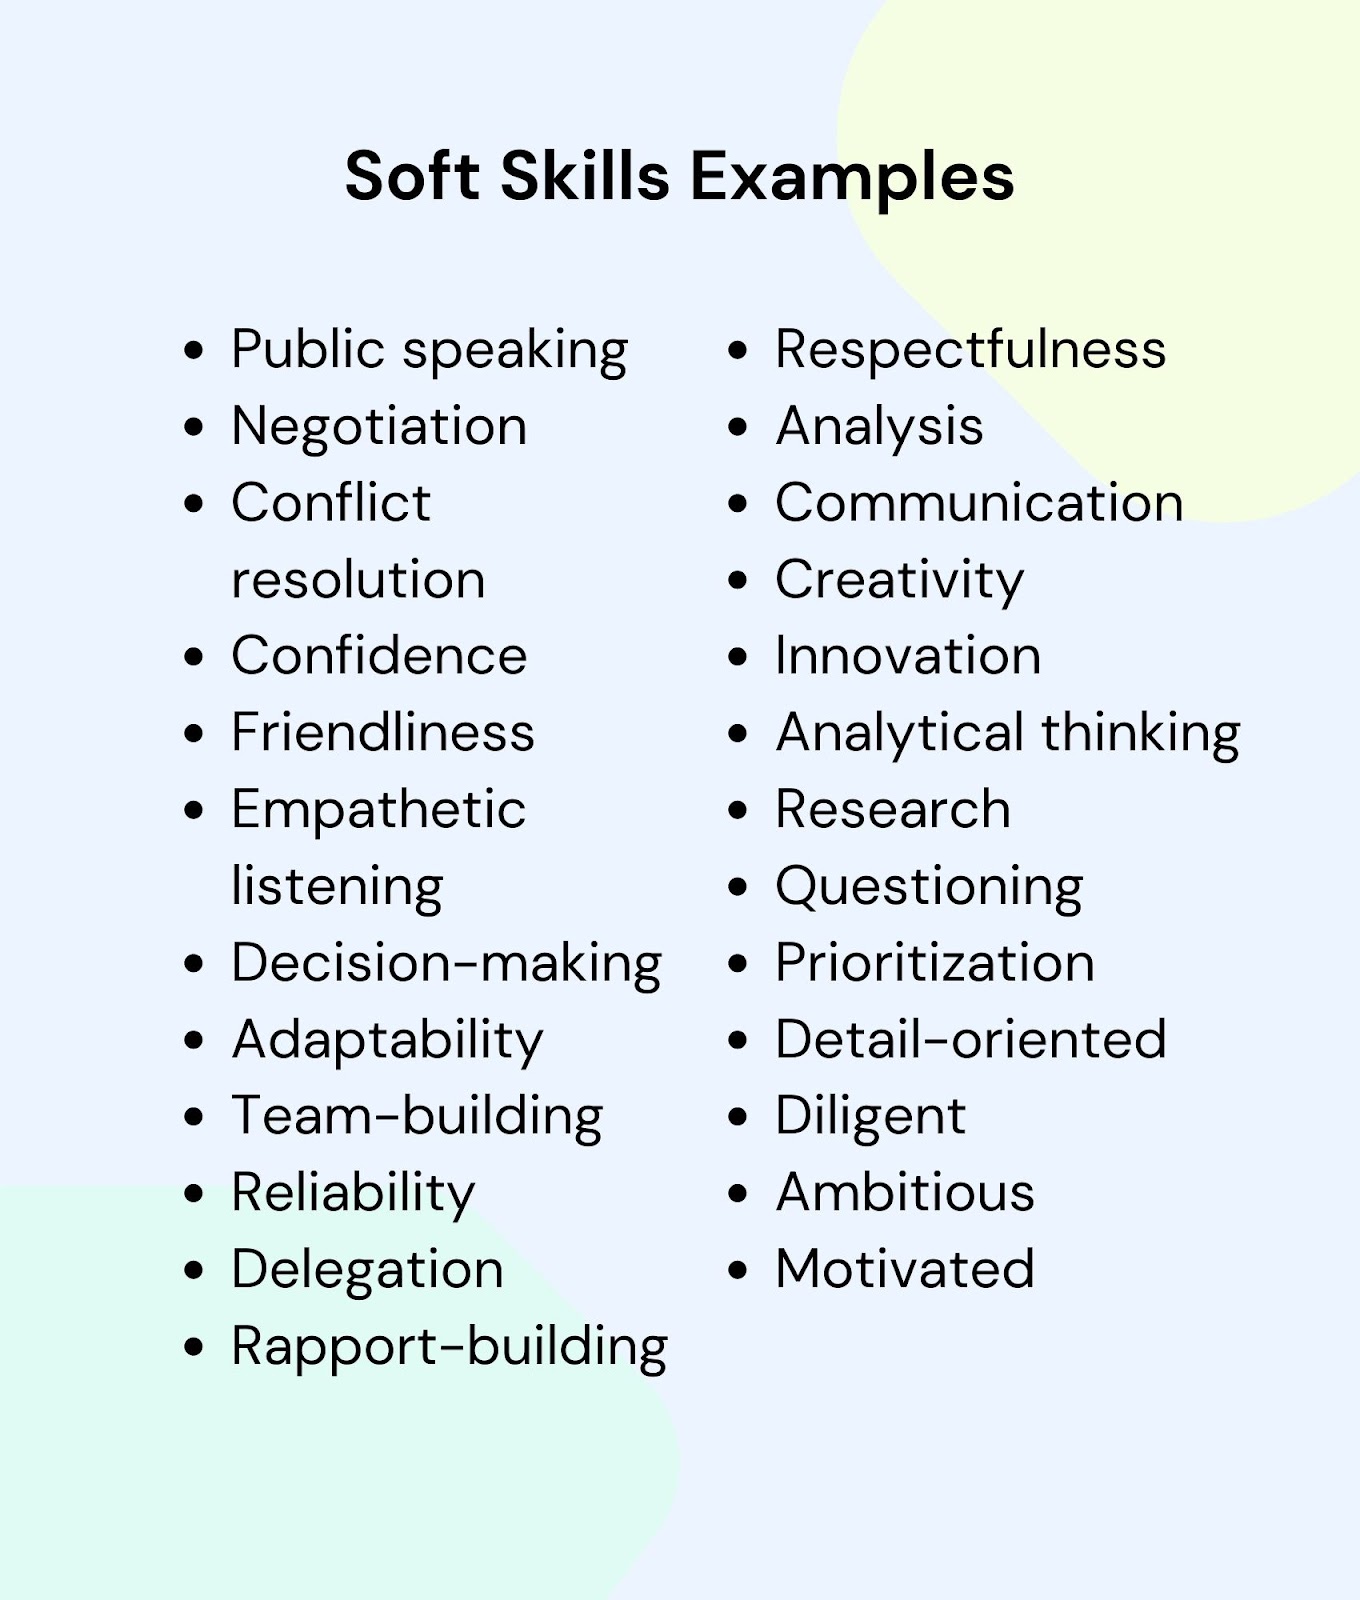 What are soft skills and how are they applied?